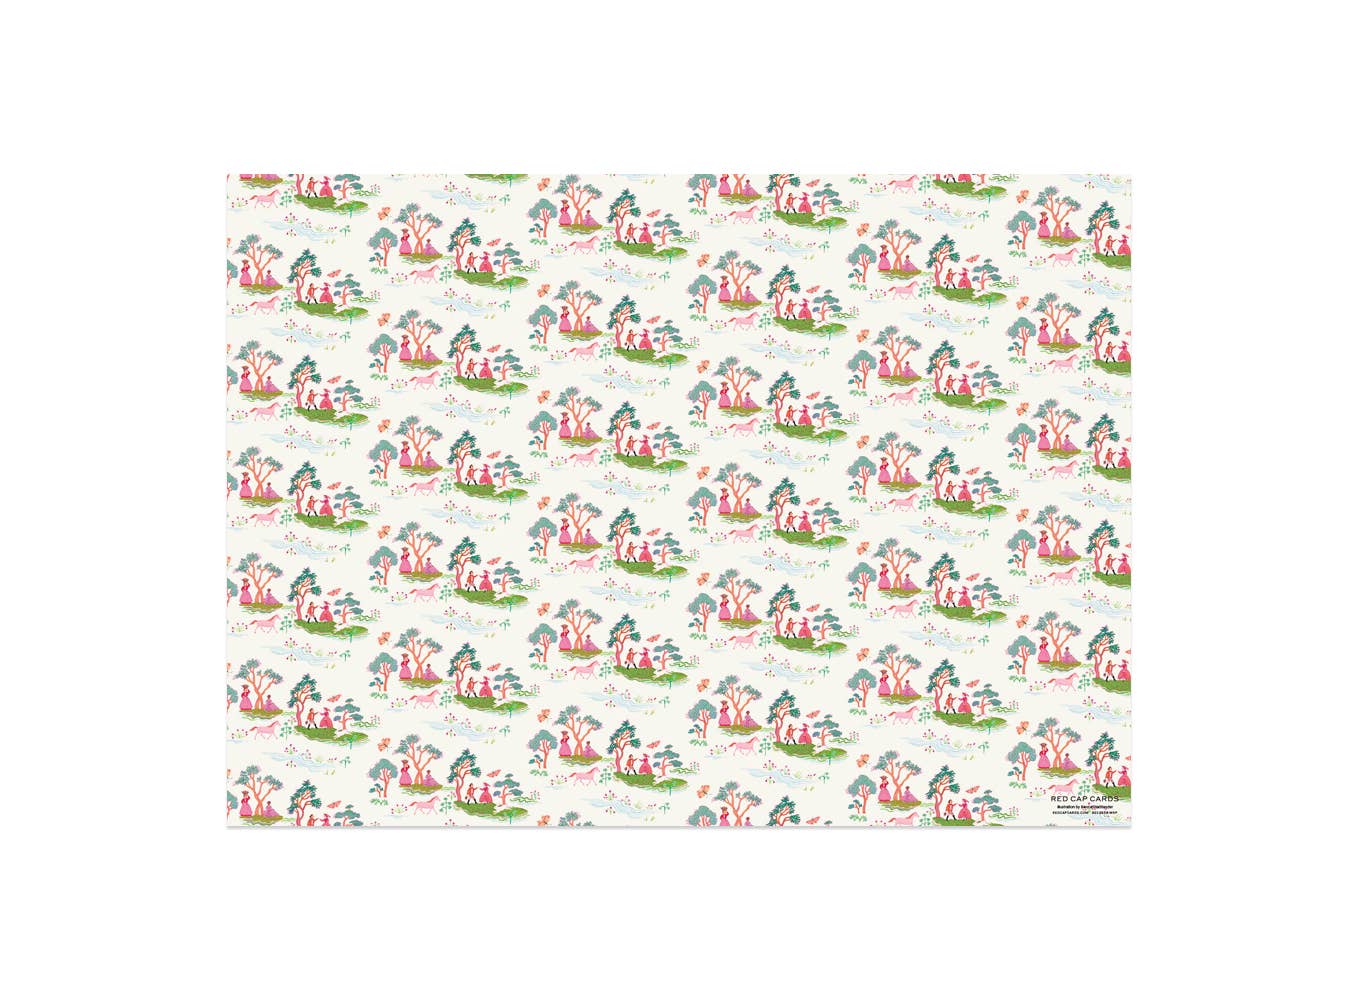 Fairy Tale Toile wrapping paper rolls